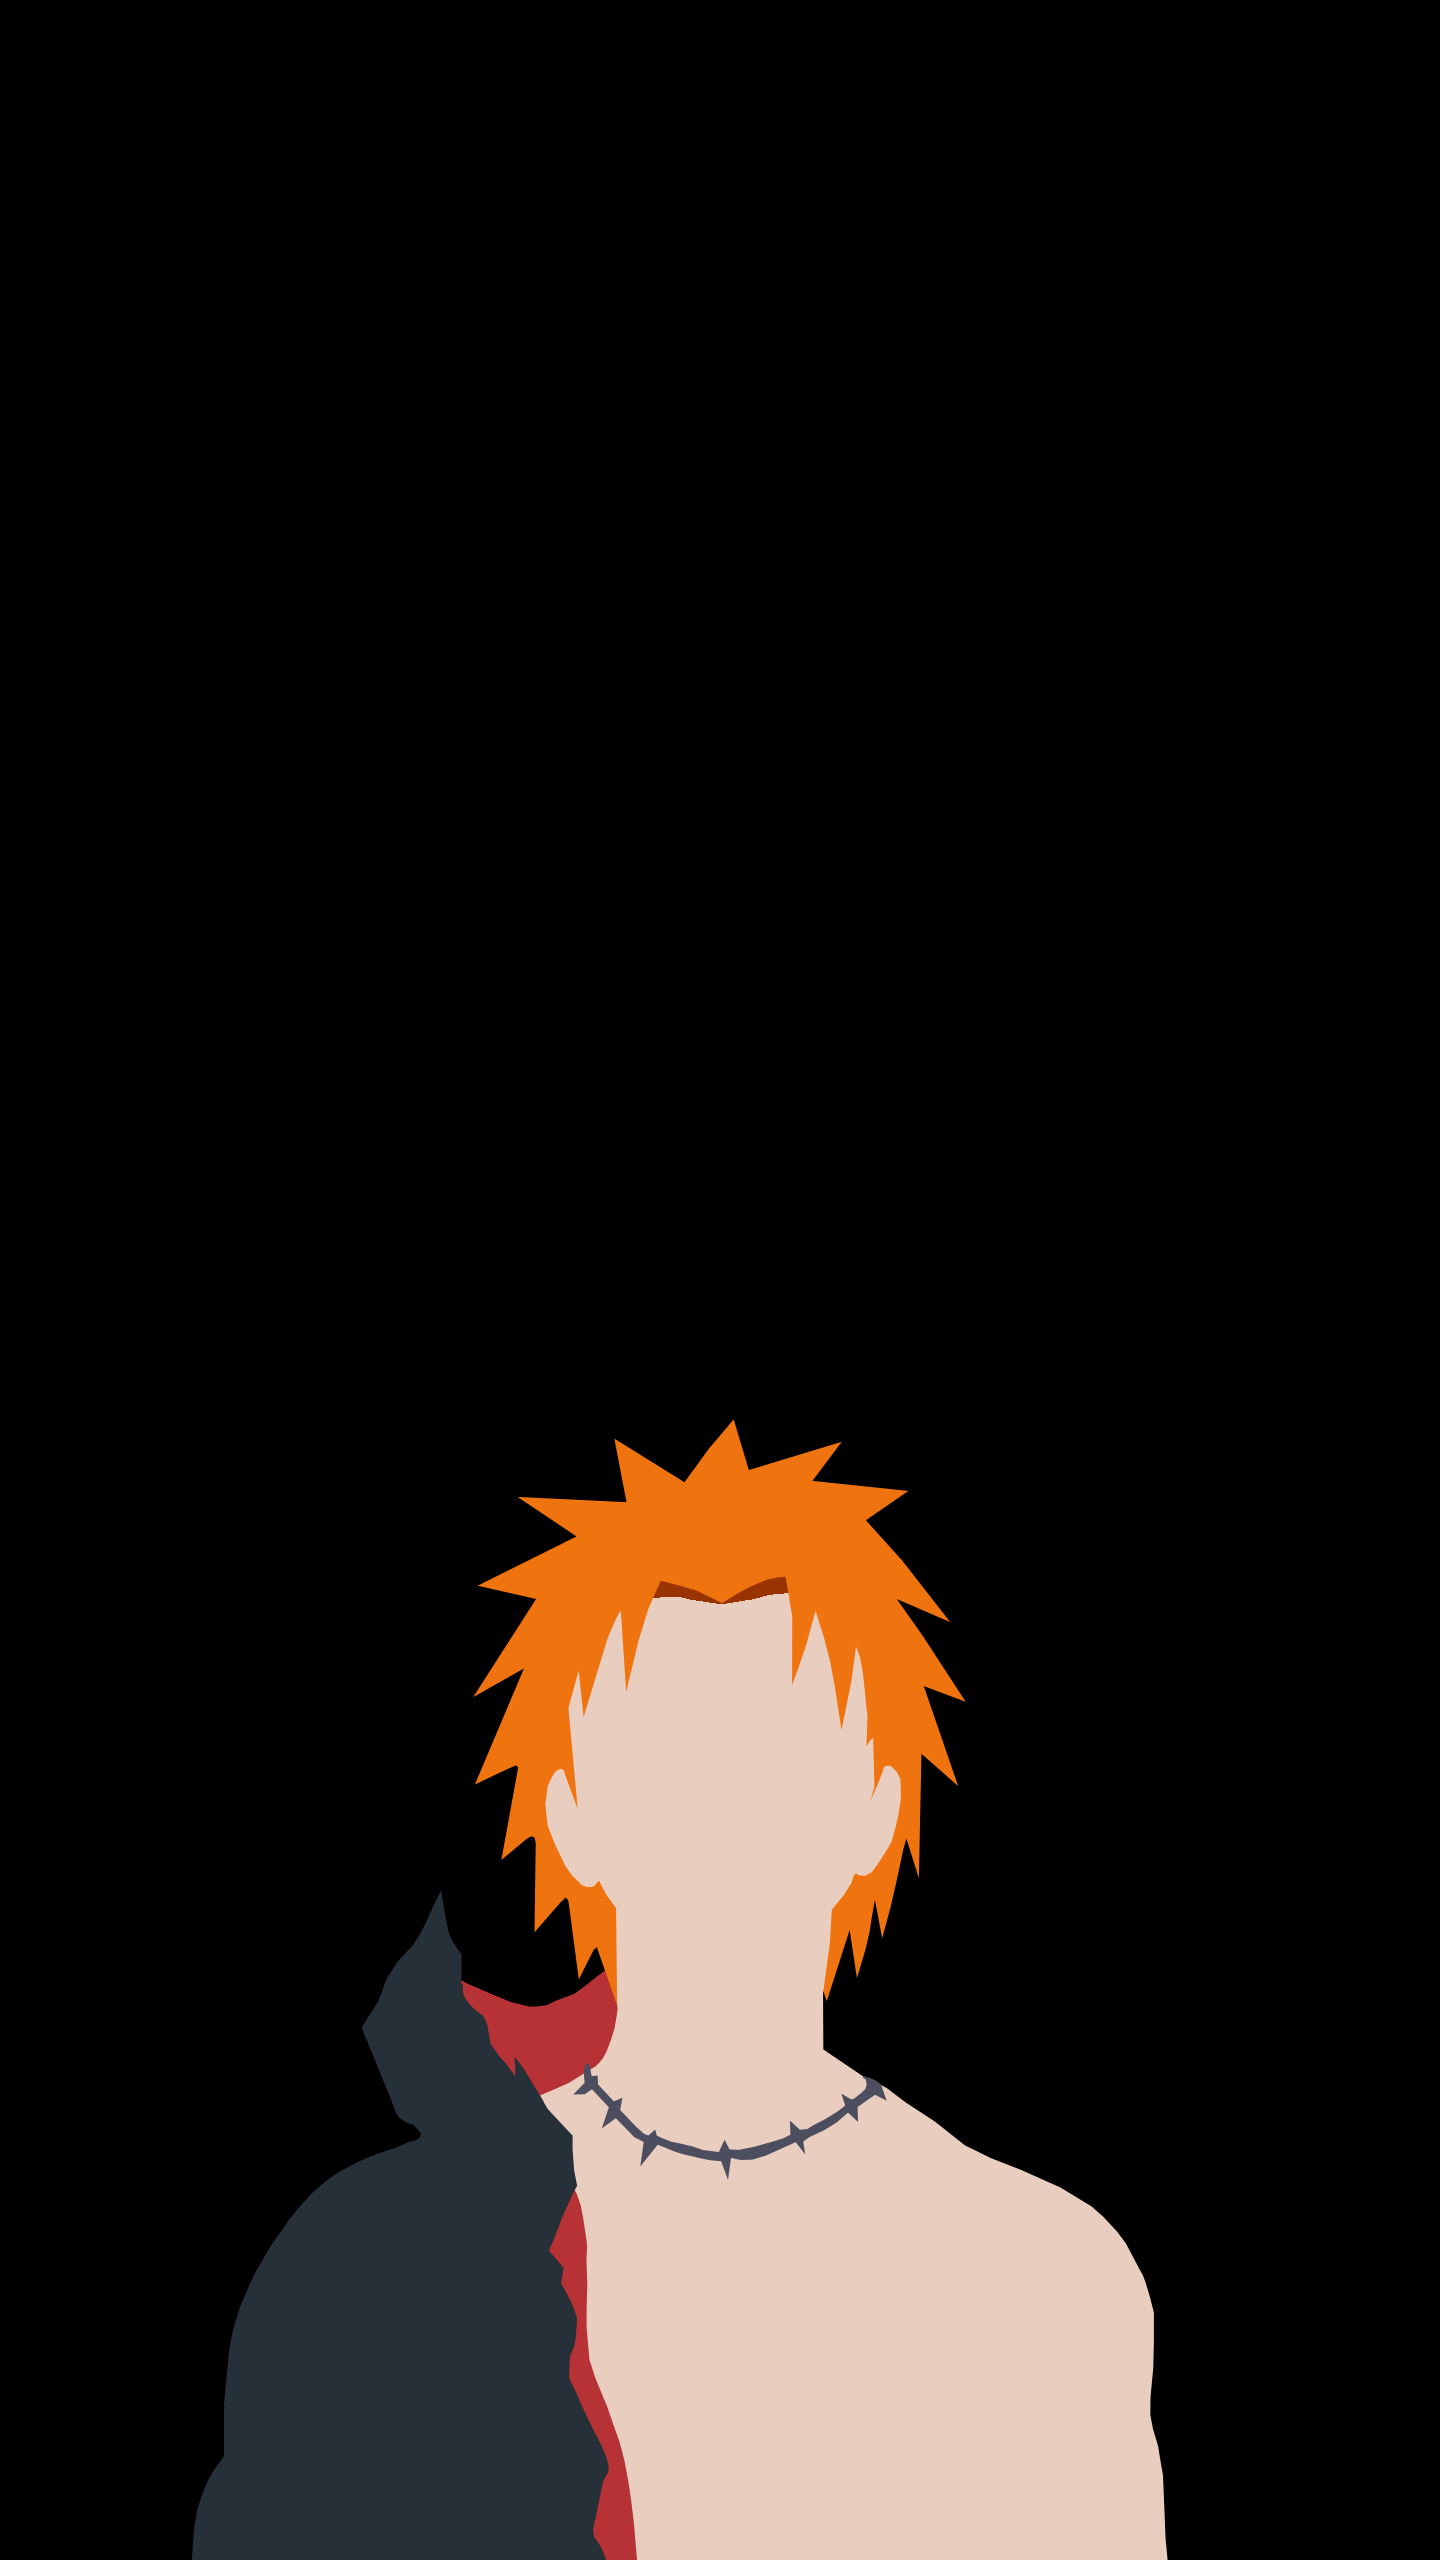 Made this last night vector AMOLED wallpaper. Papeis de